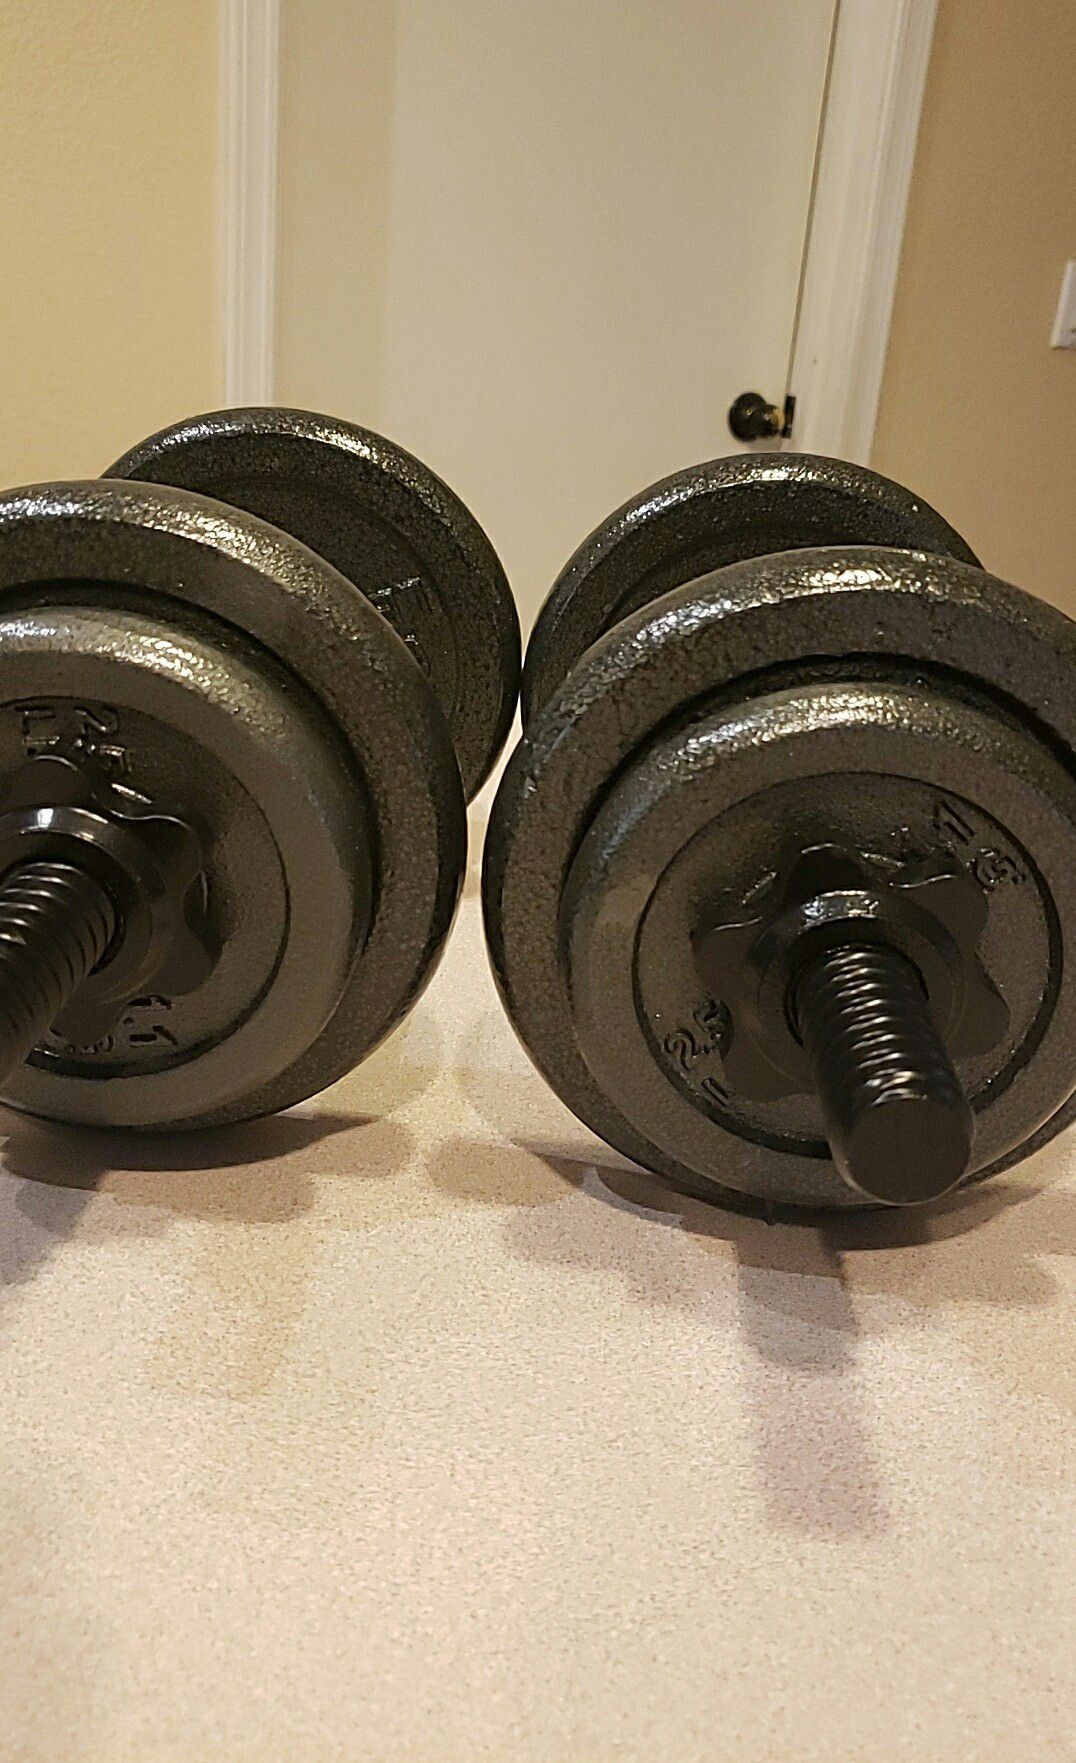 40lb Adjustable Dumbbell Weights - Pair